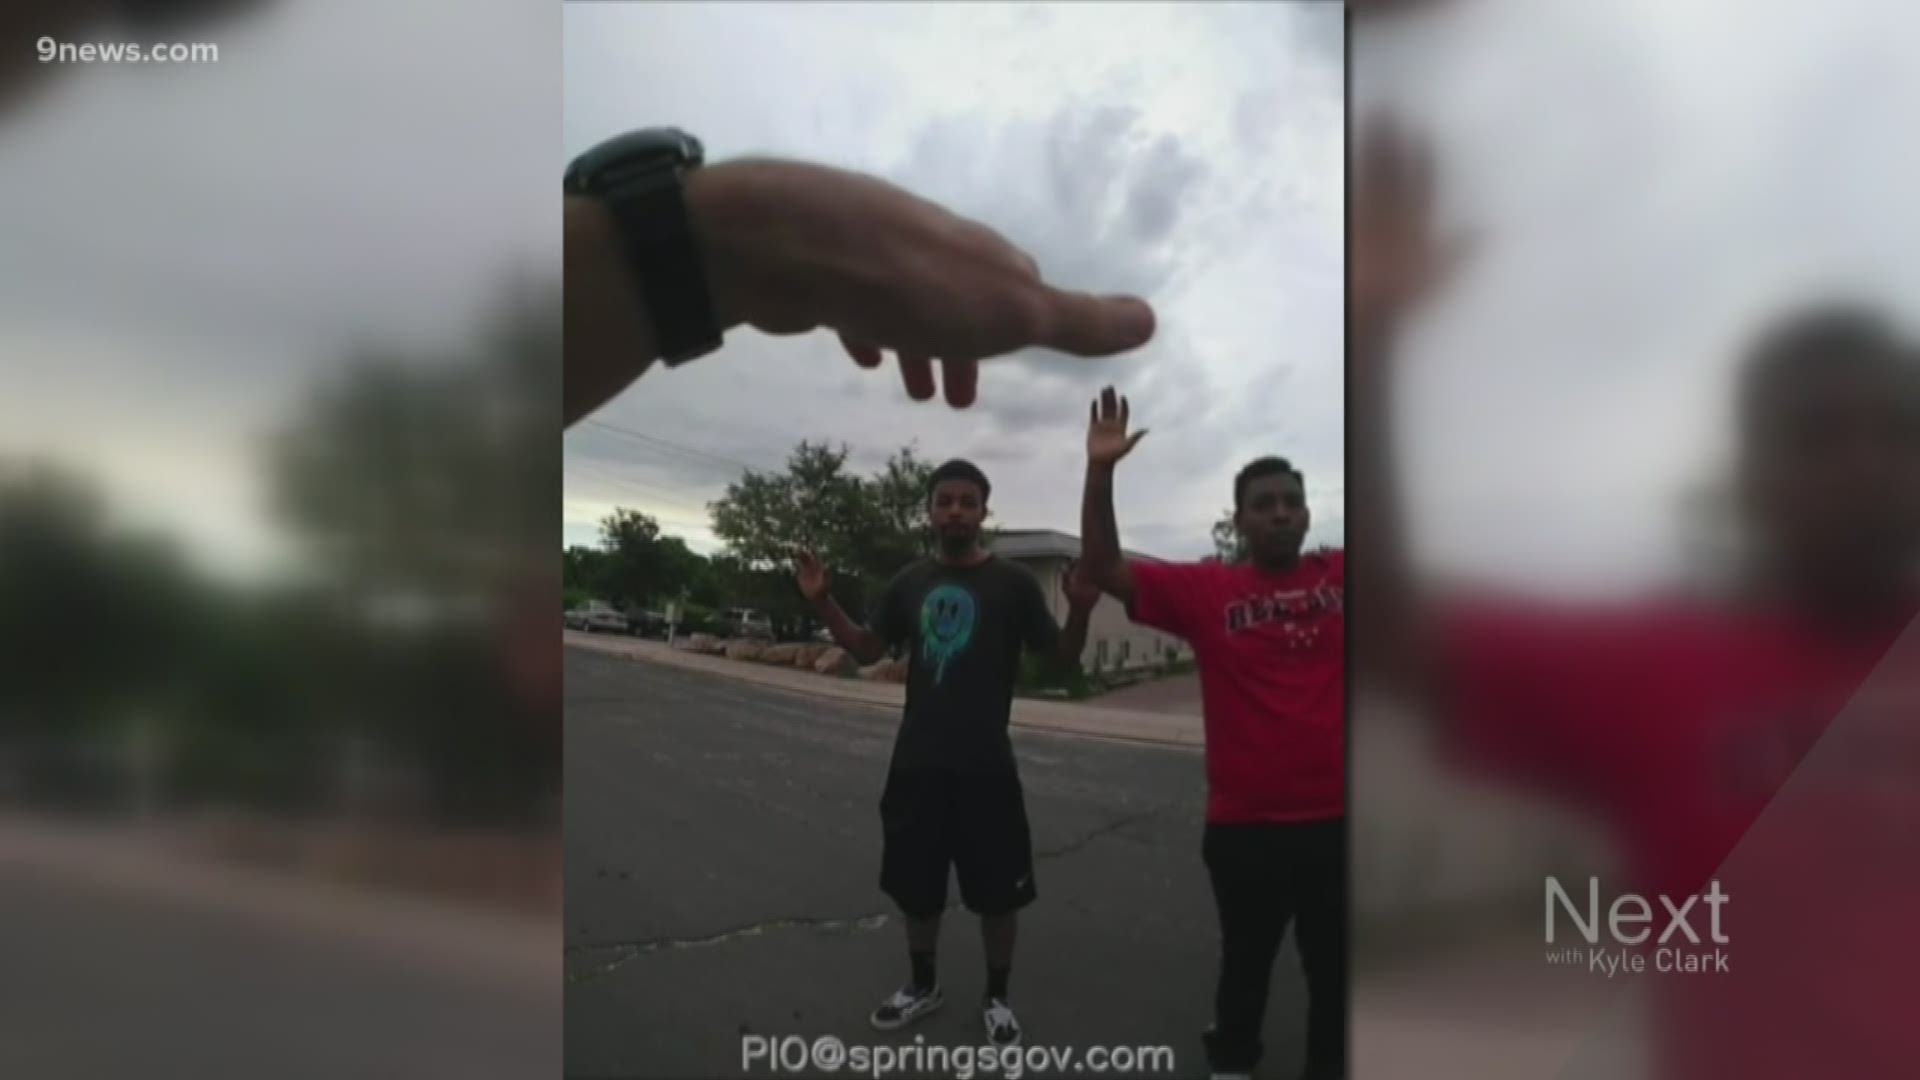 The 19-year-old was shot and killed by Colorado Springs police officers in August. Video of the incident shows him running away when he was shot.